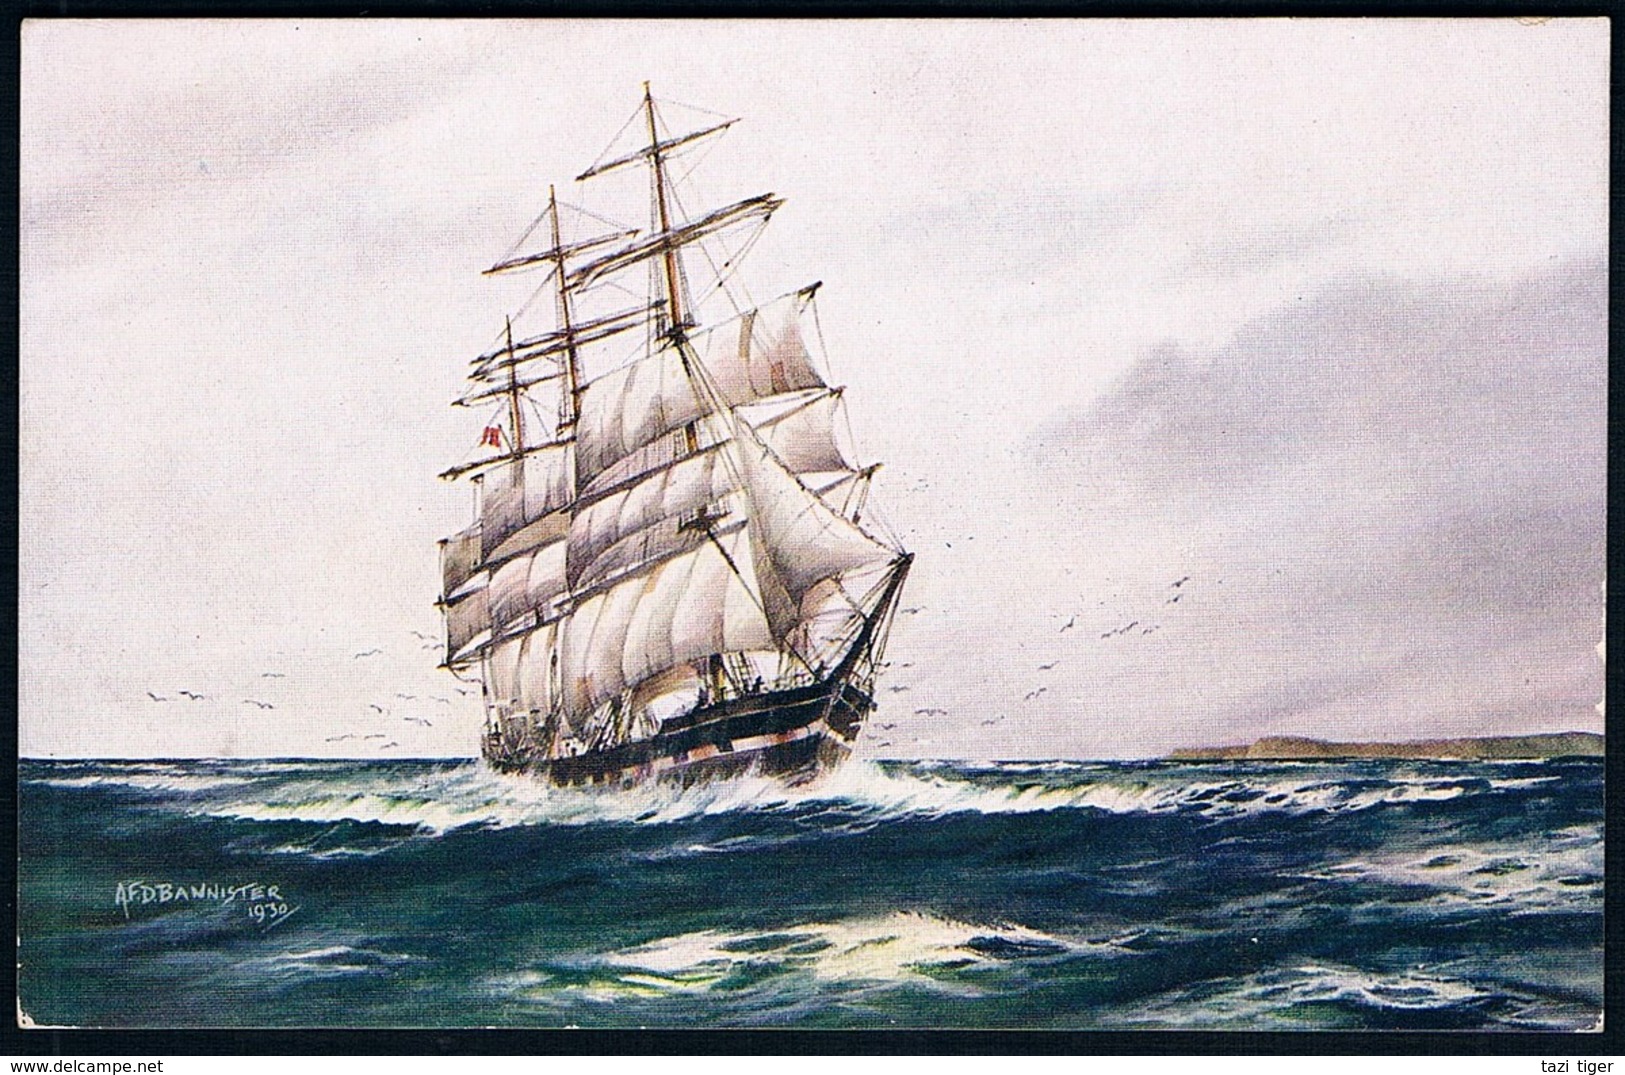 Postcard • Salmon Series # 3871 • AFD Bannister, 1930 • A Norwegian Sailer Beating Up Channel - Sailing Vessels